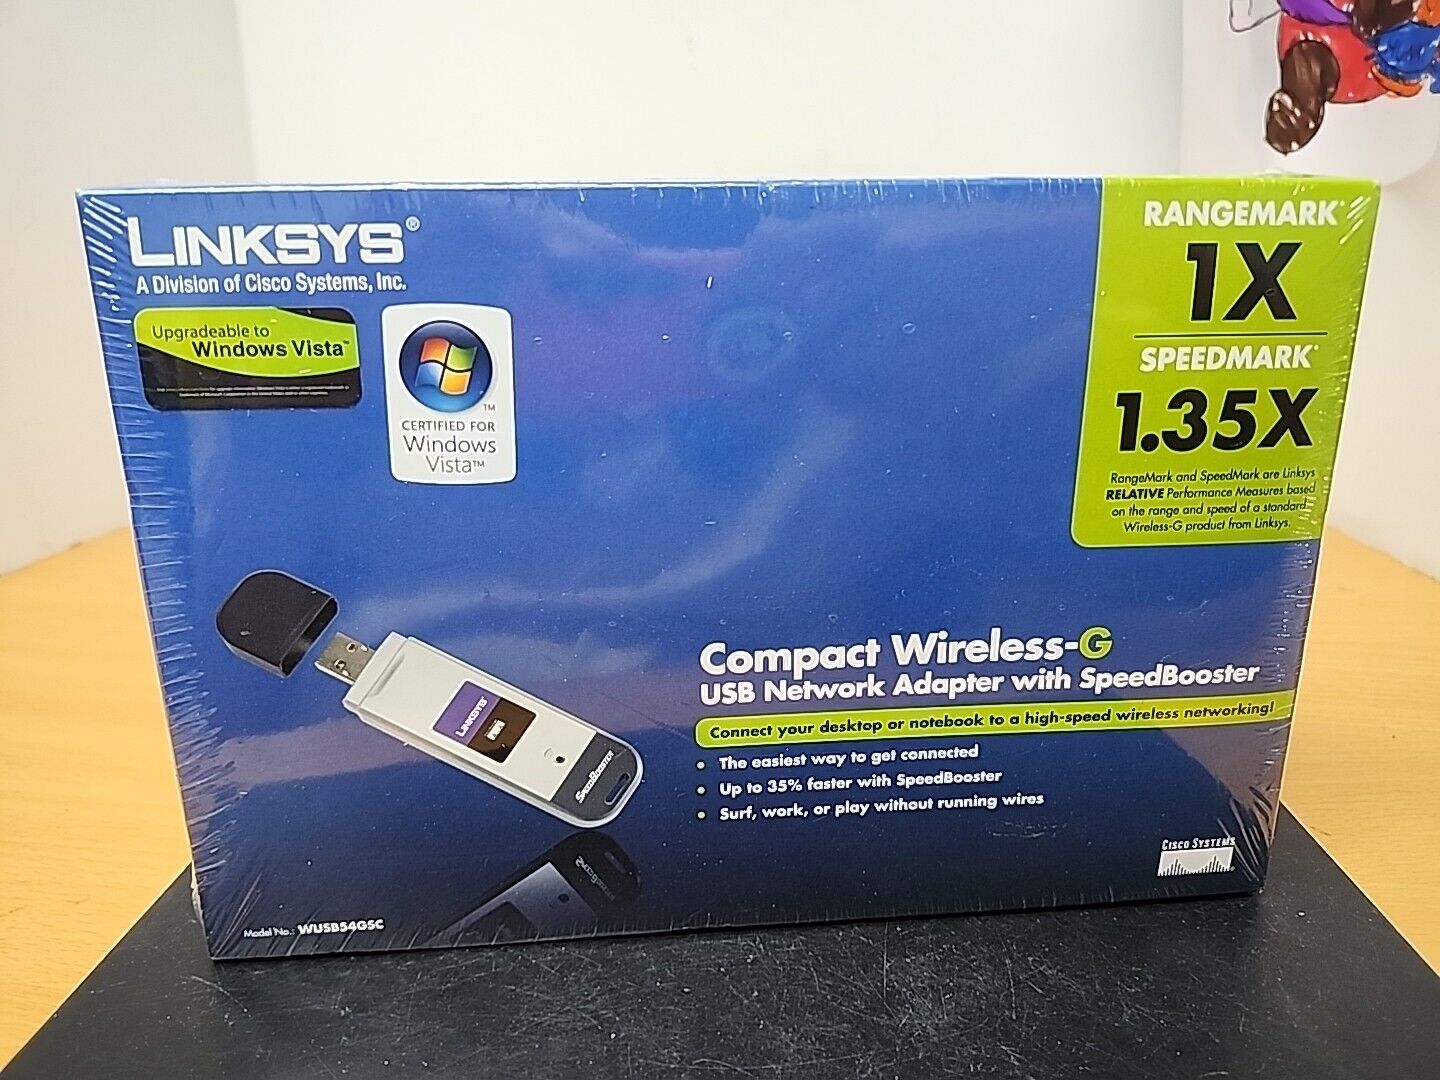 Linksys WUSB54GC Compact Wireless-G USB 2.0 WIFI Network Card Adapter 